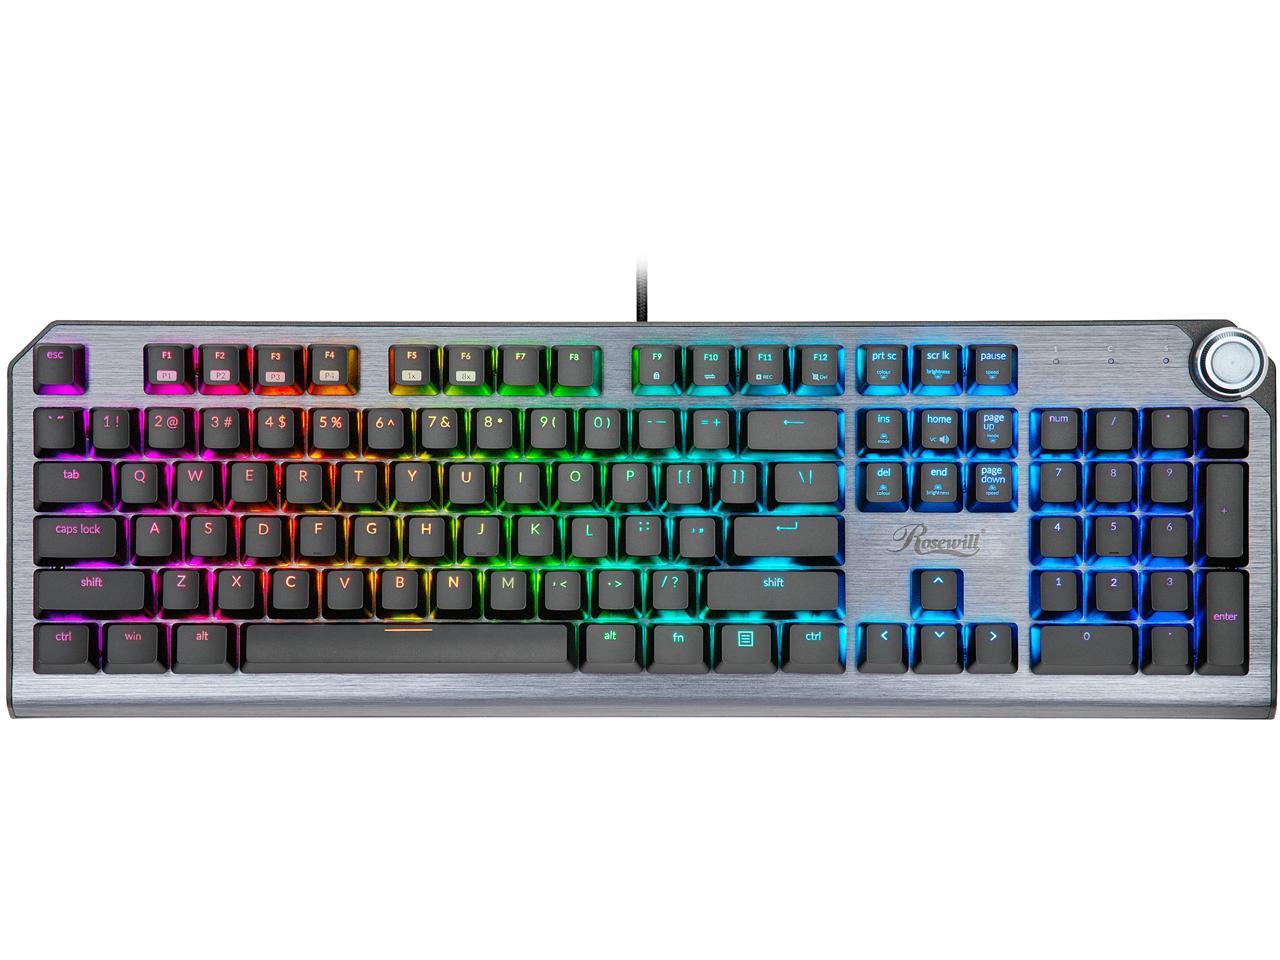 NEON Blue Switches Rosewill Mechanical Gaming Keyboard 22 RGB Backlit Modes 